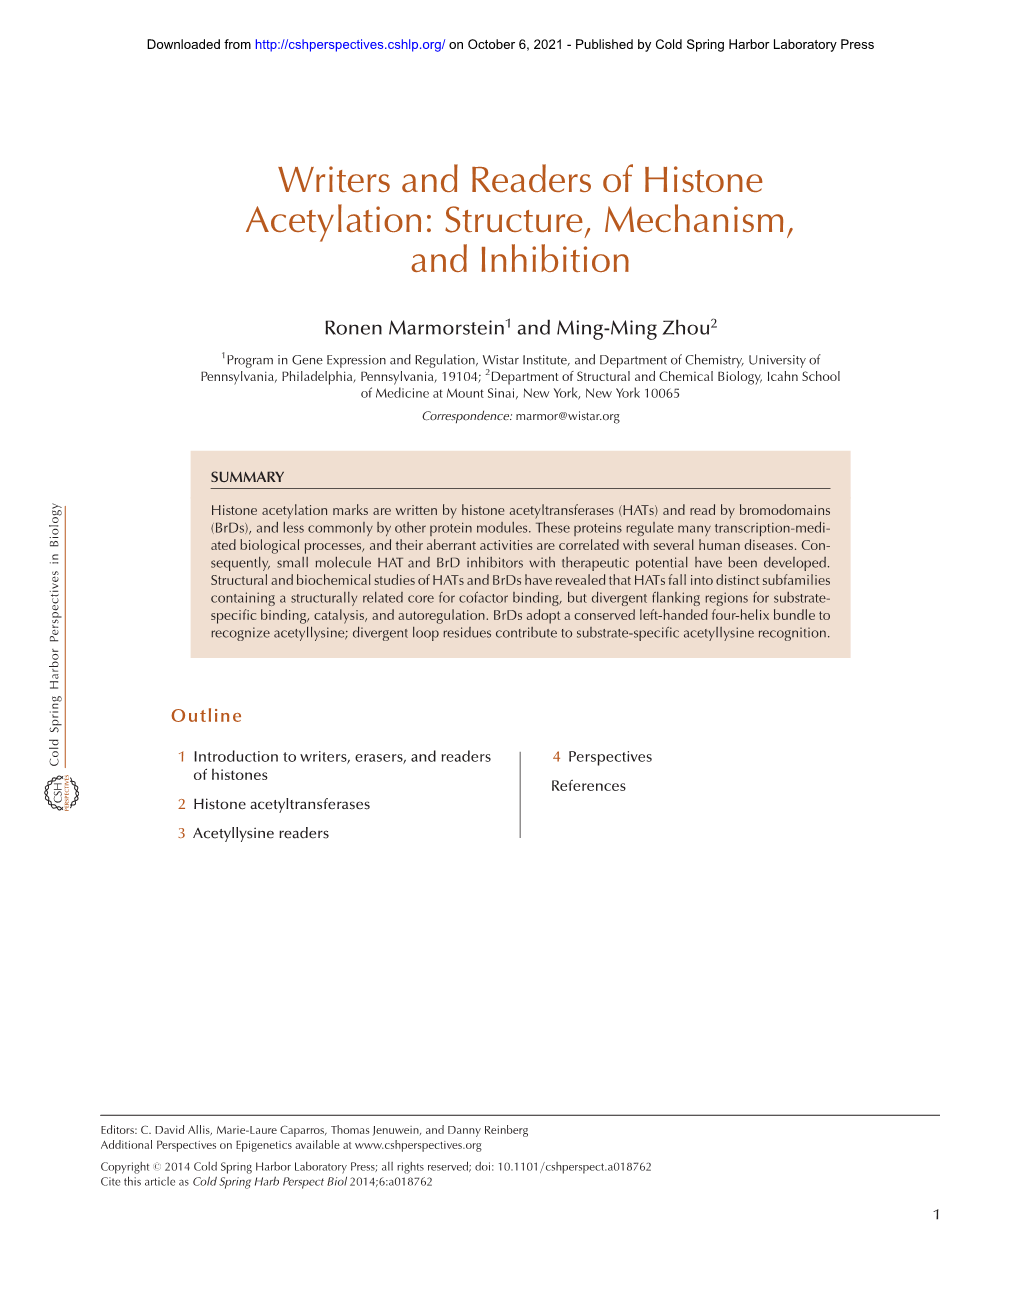 Writers and Readers of Histone Acetylation: Structure, Mechanism, and Inhibition